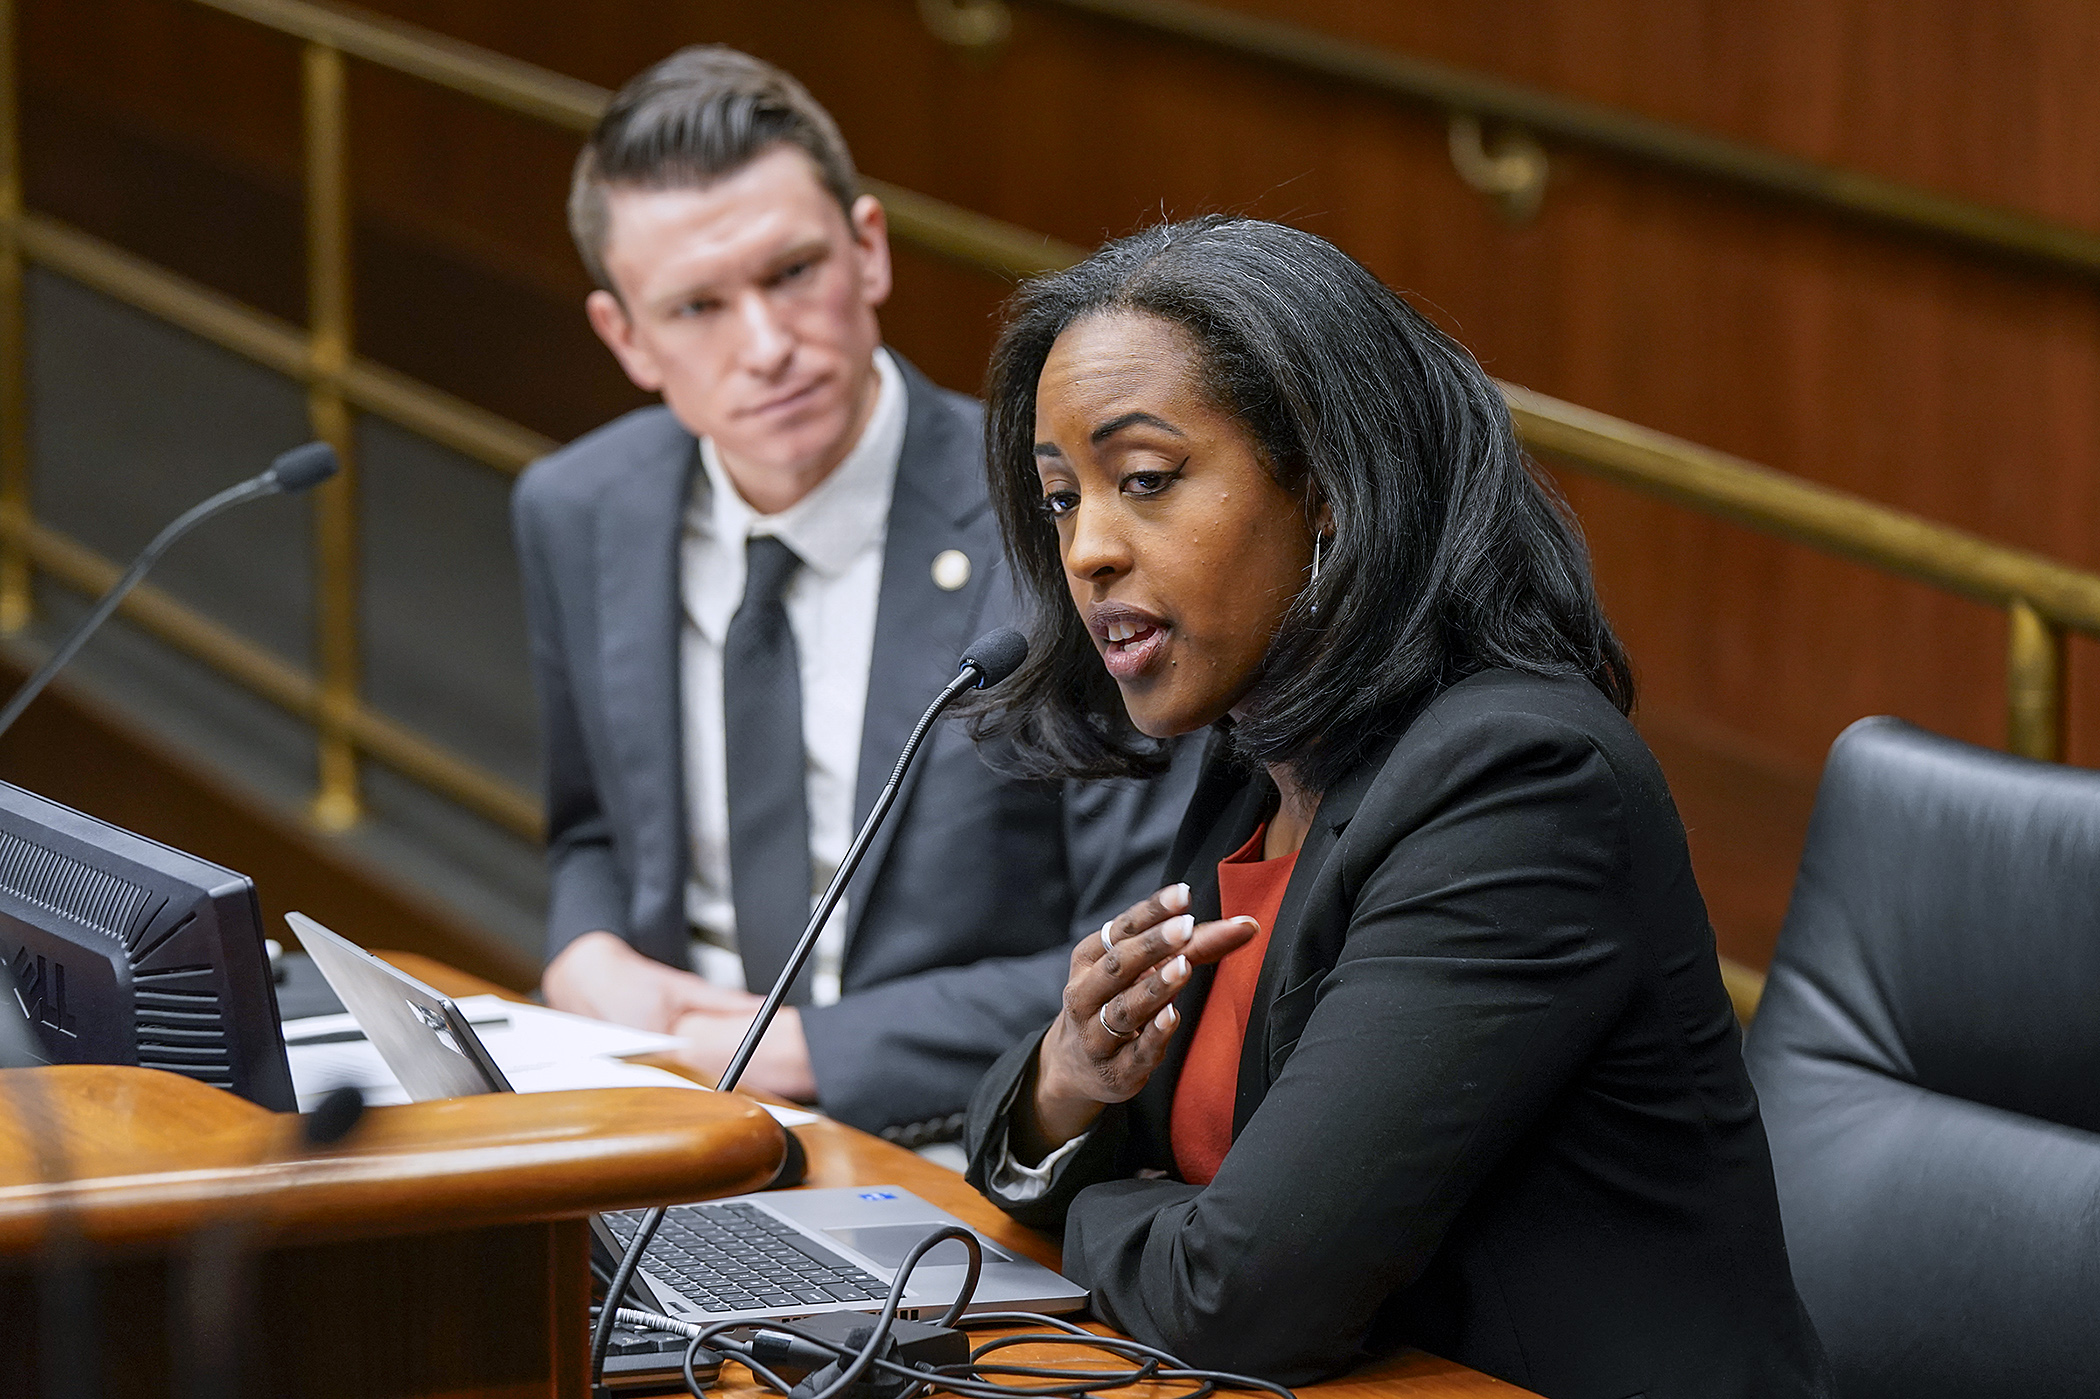 Yelena Bailey, executive director of the Minnesota Professional Educators Licensing and Standards Board, testifies March 21 before the House Education Finance Committee on a bill to establish a system to pay student teachers. (Photo by Michele Jokinen)